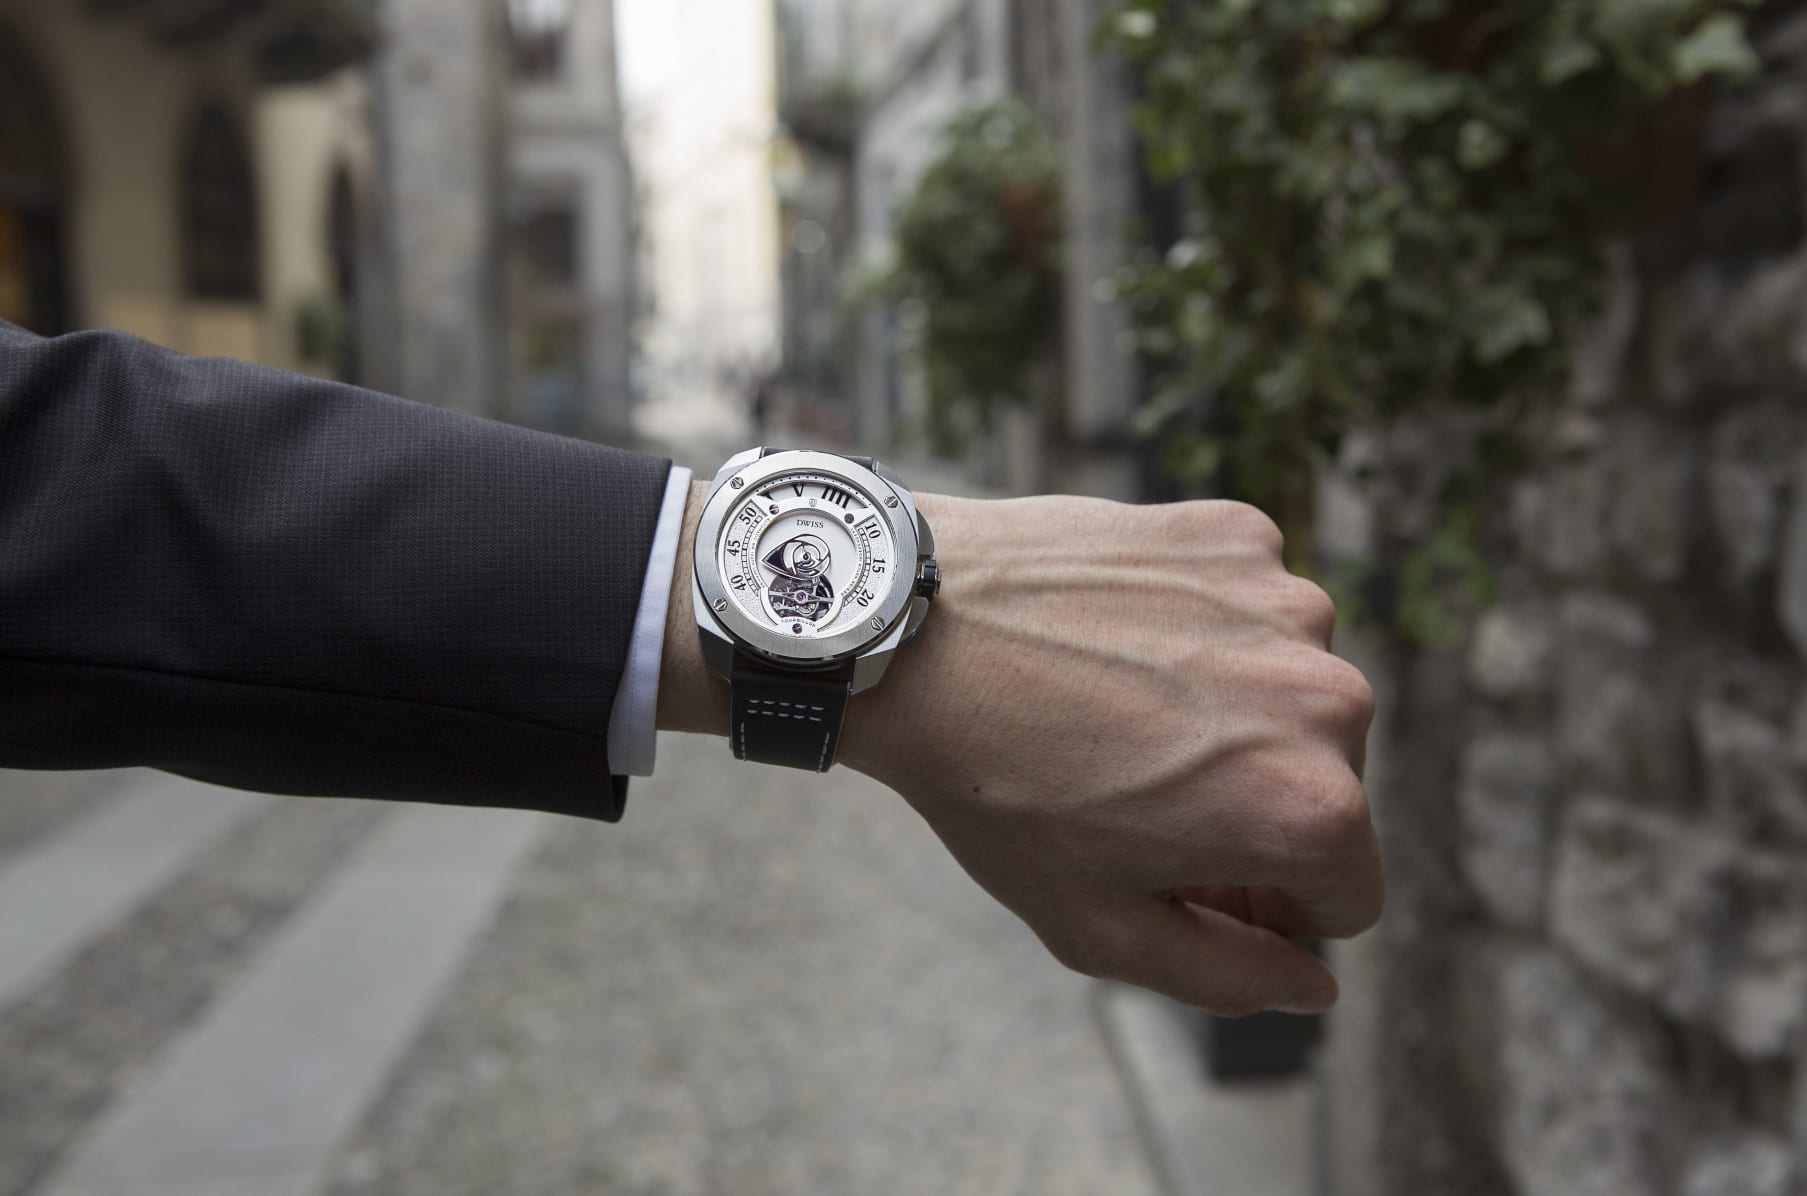 The Most Crowdfunded Watch Company Ever Is Making $1,000+ Luxury